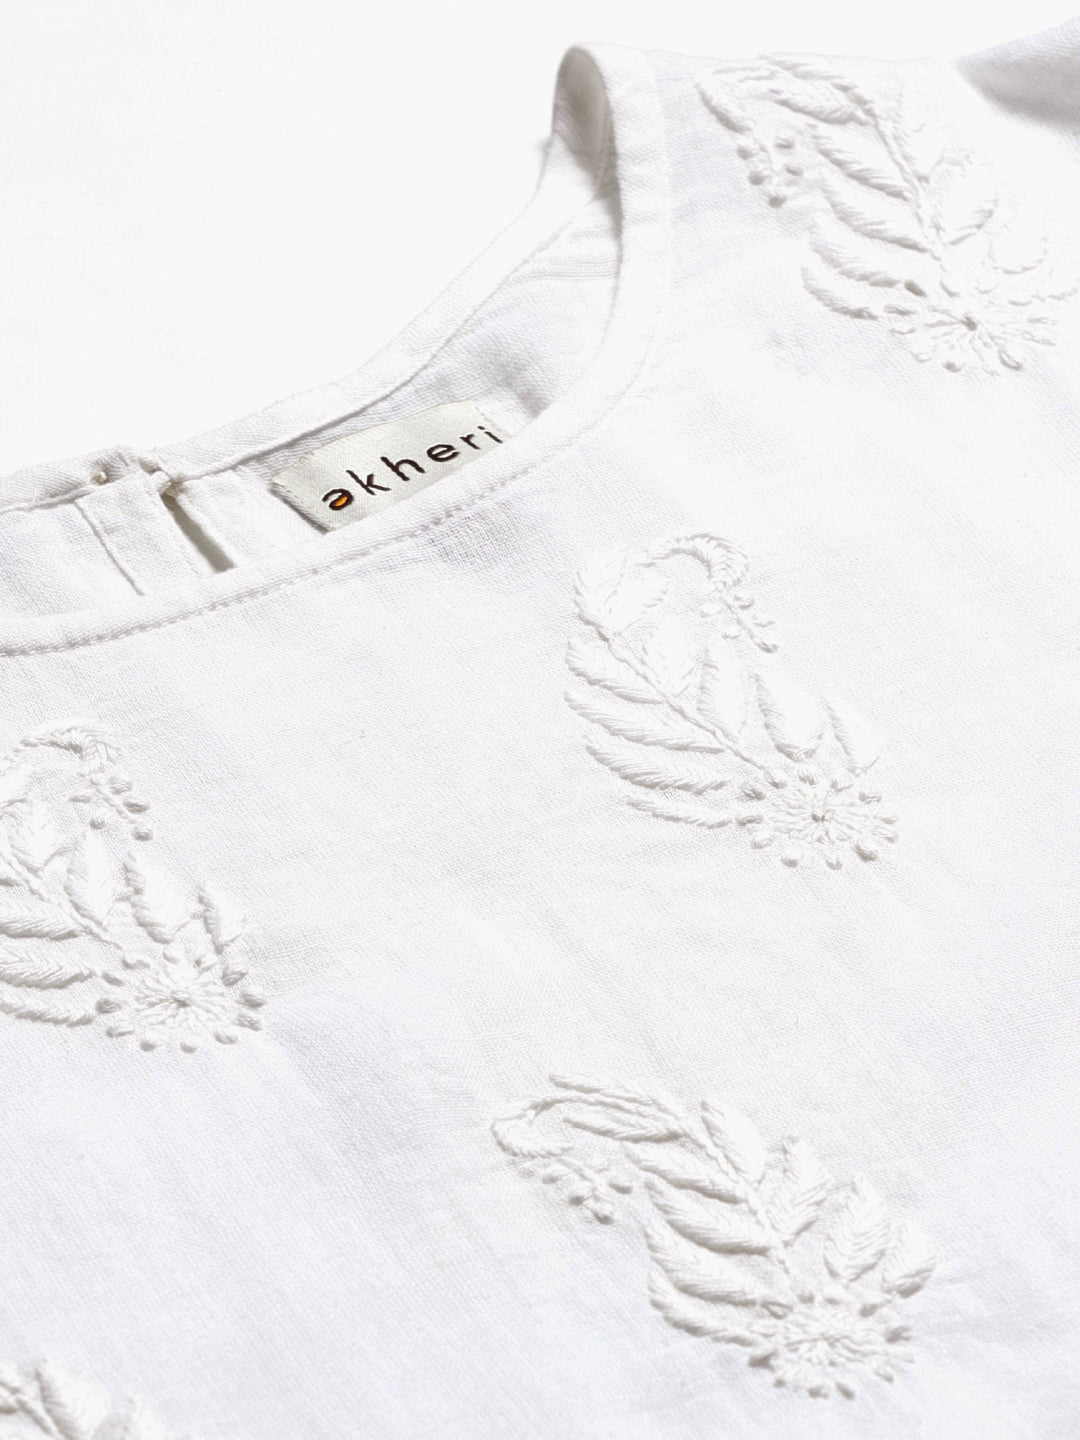 Off White Embroidered Top with Ruffled Sleeves